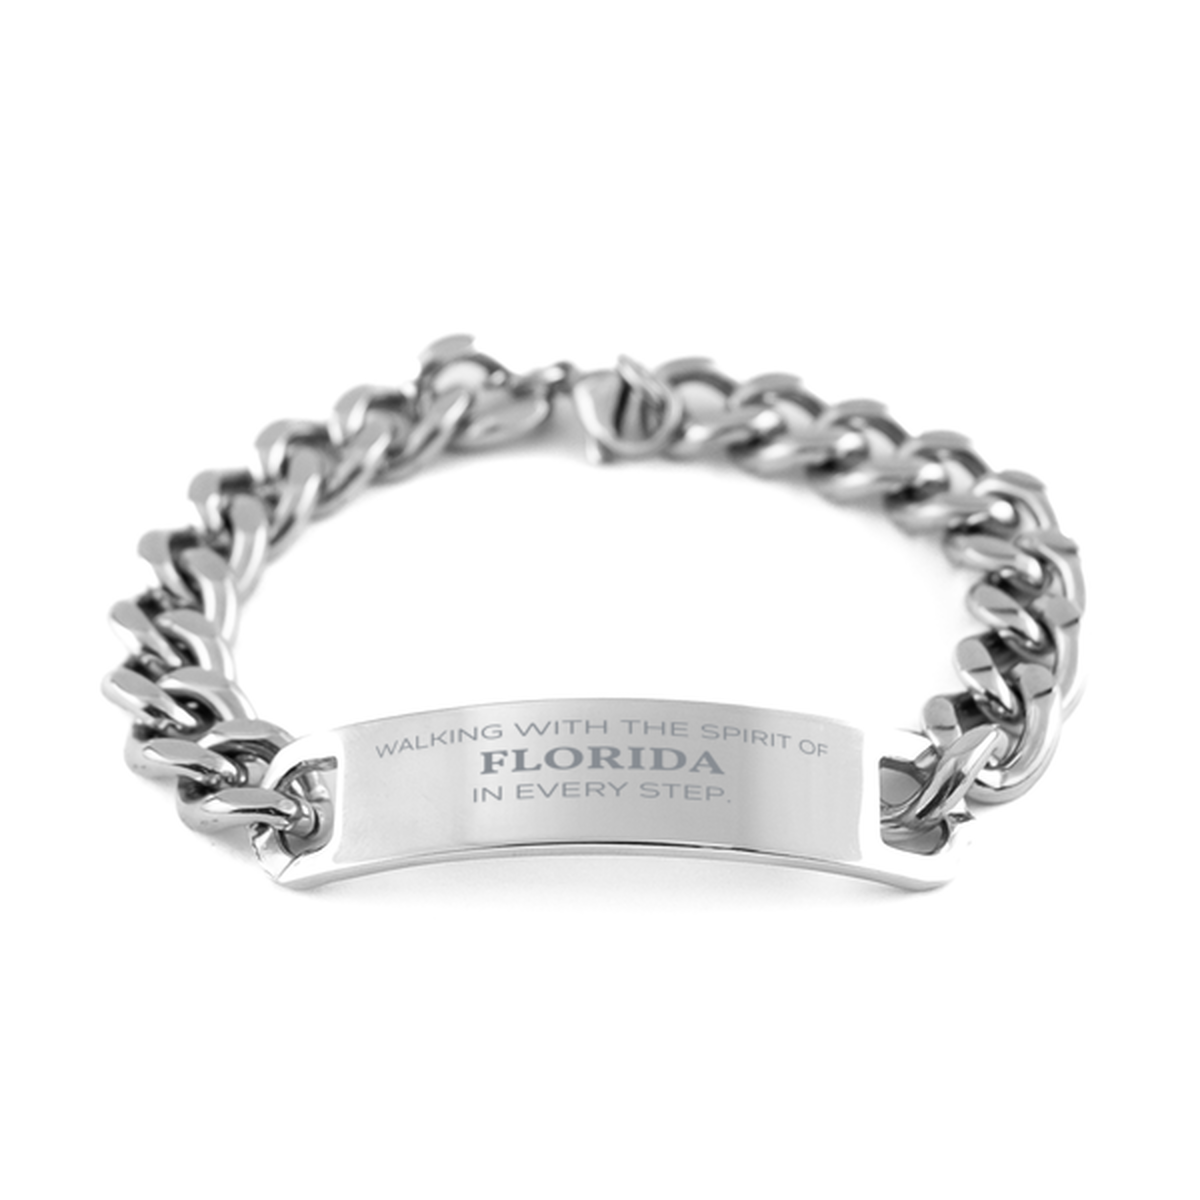 Florida Gifts, Walking with the spirit, Love Florida Birthday Christmas Cuban Chain Stainless Steel Bracelet For Florida People, Men, Women, Friends